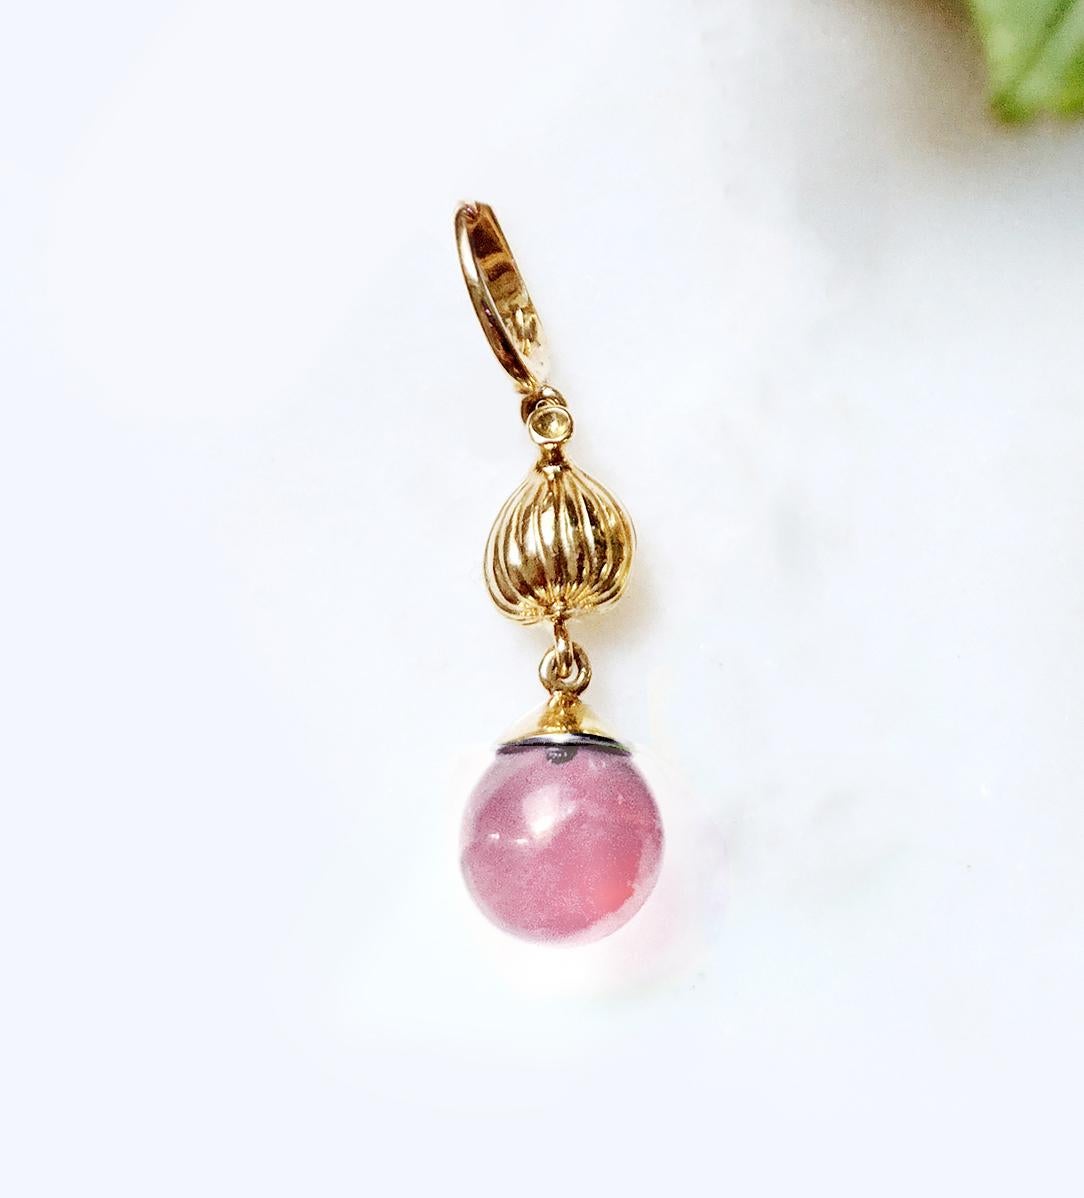 Women's or Men's Yellow Gold Drop Pendant Necklace with Rose Quartz by the Artist For Sale